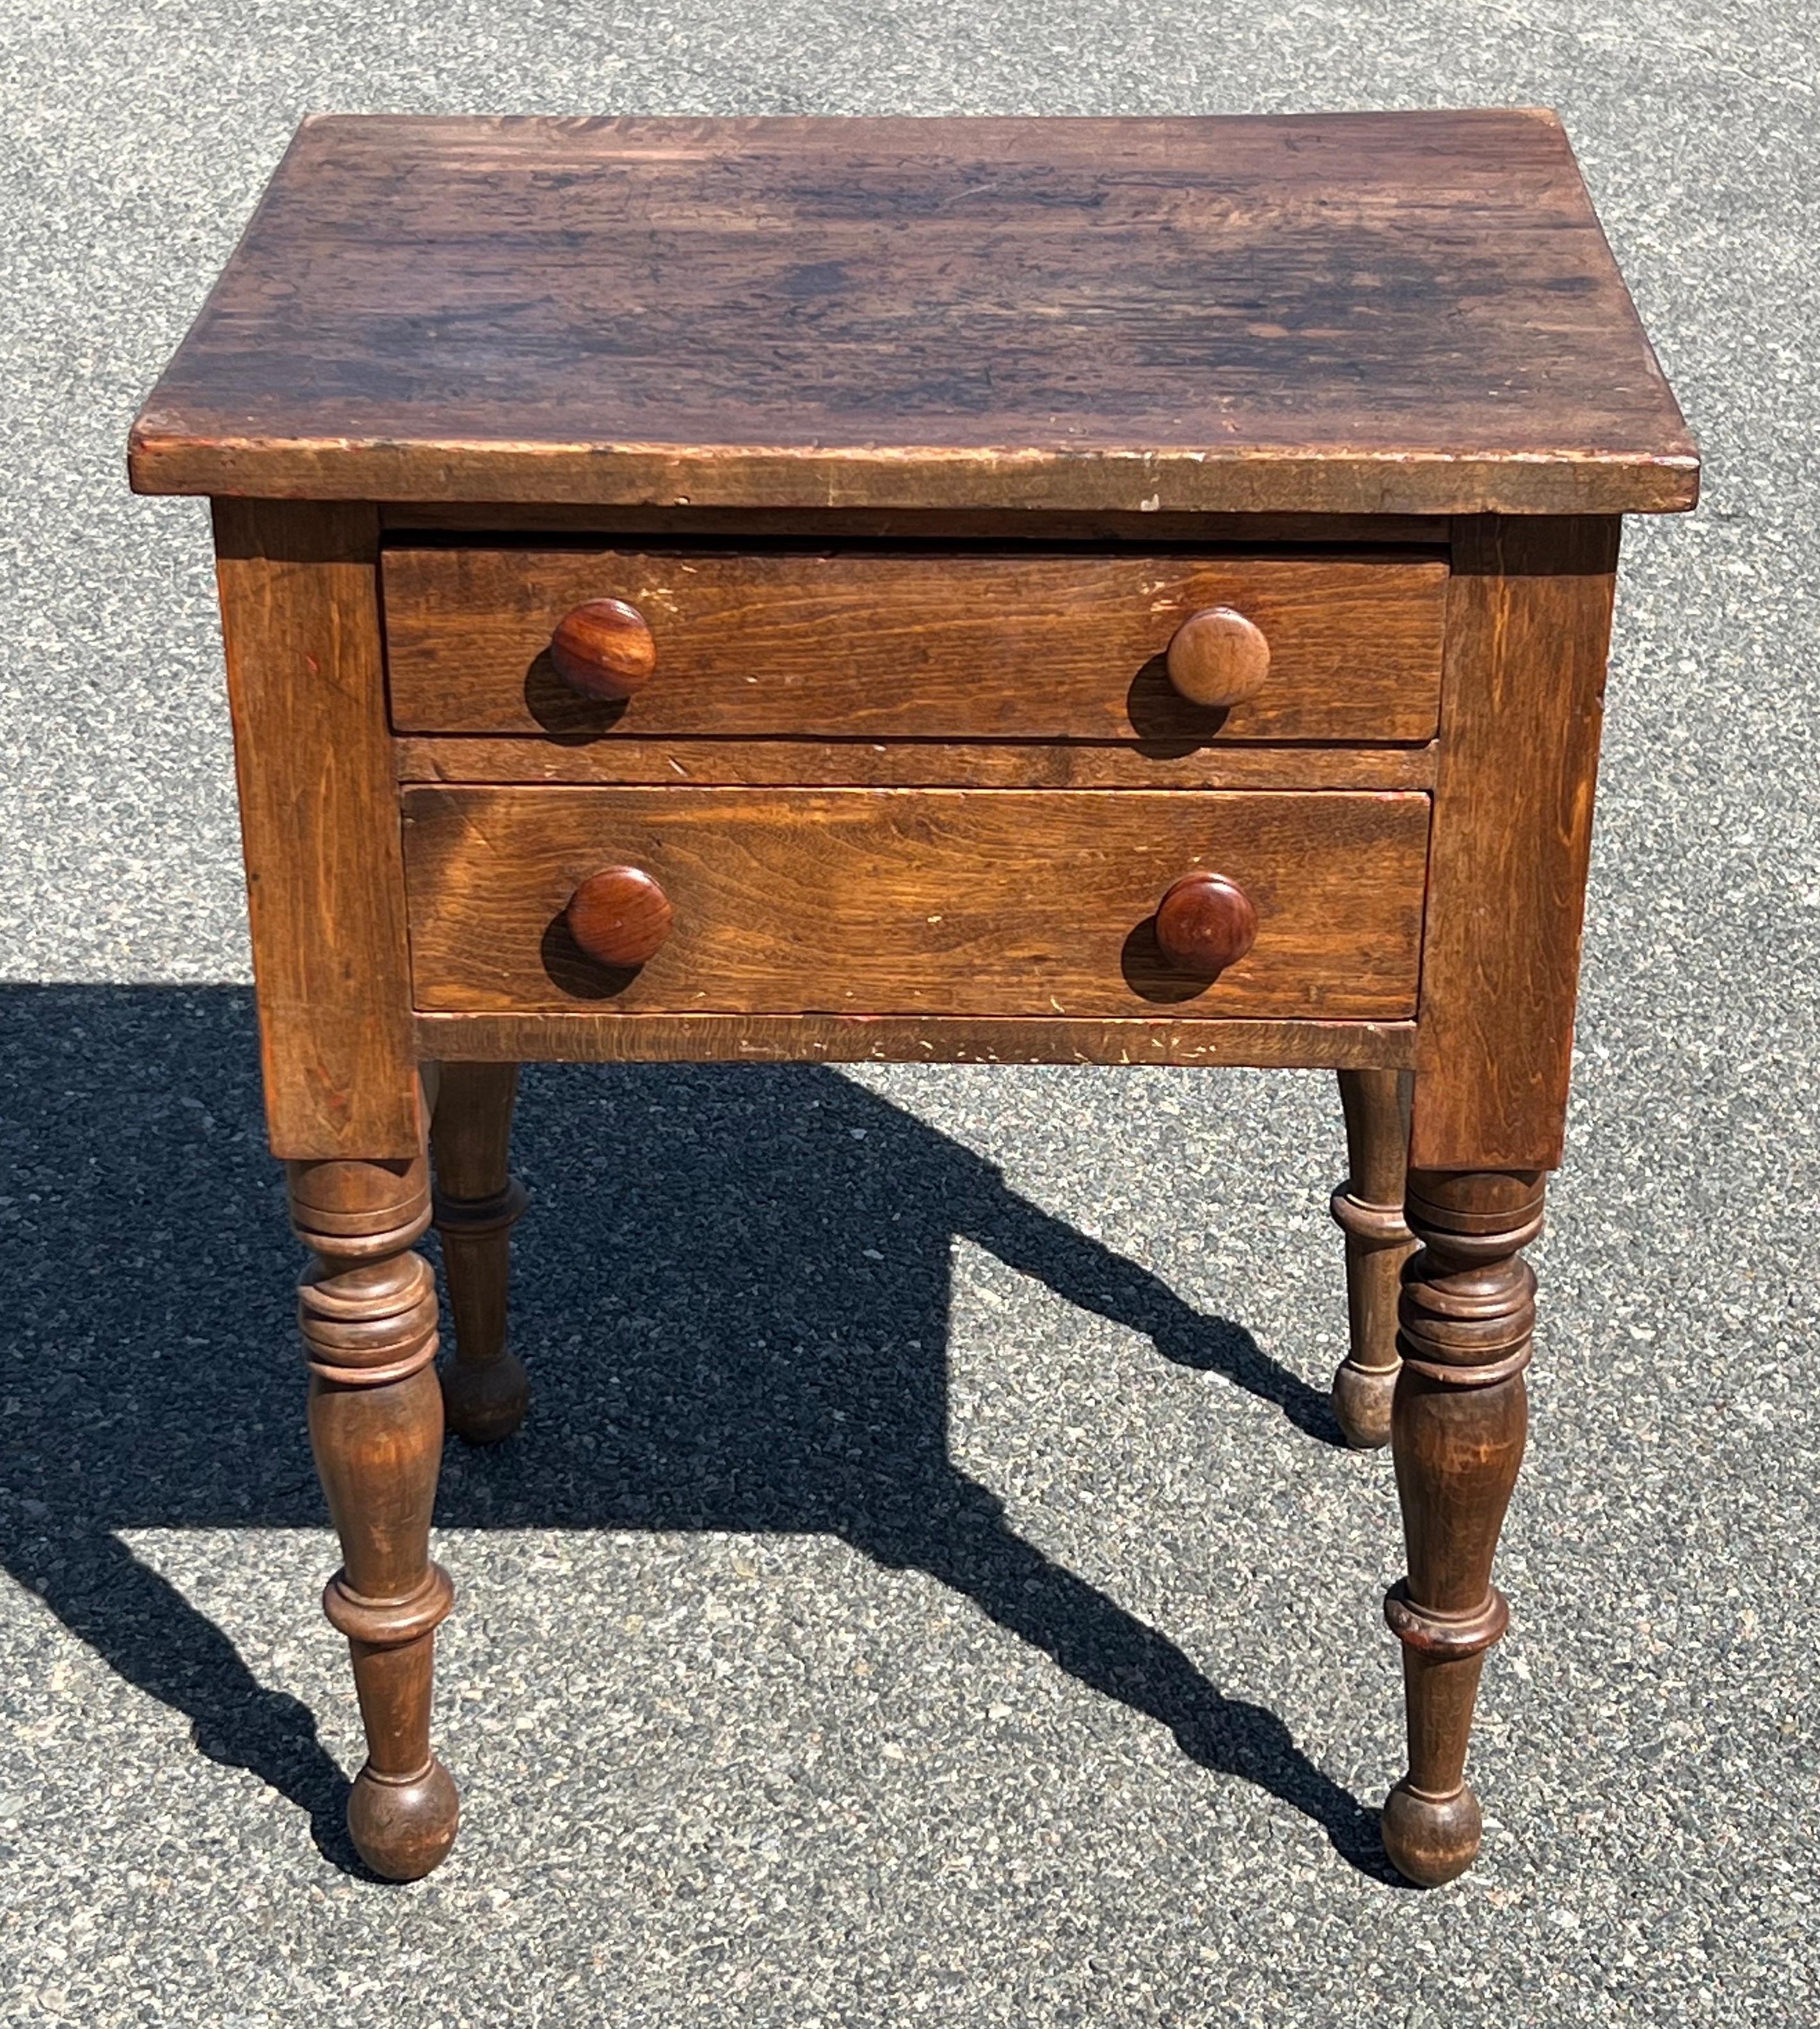 19th century two drawer stand, maple construction with some tiger grain visible.  Original yellow painted drawer interiors, knobs likely replaced, boldly turned legs and bun feet.